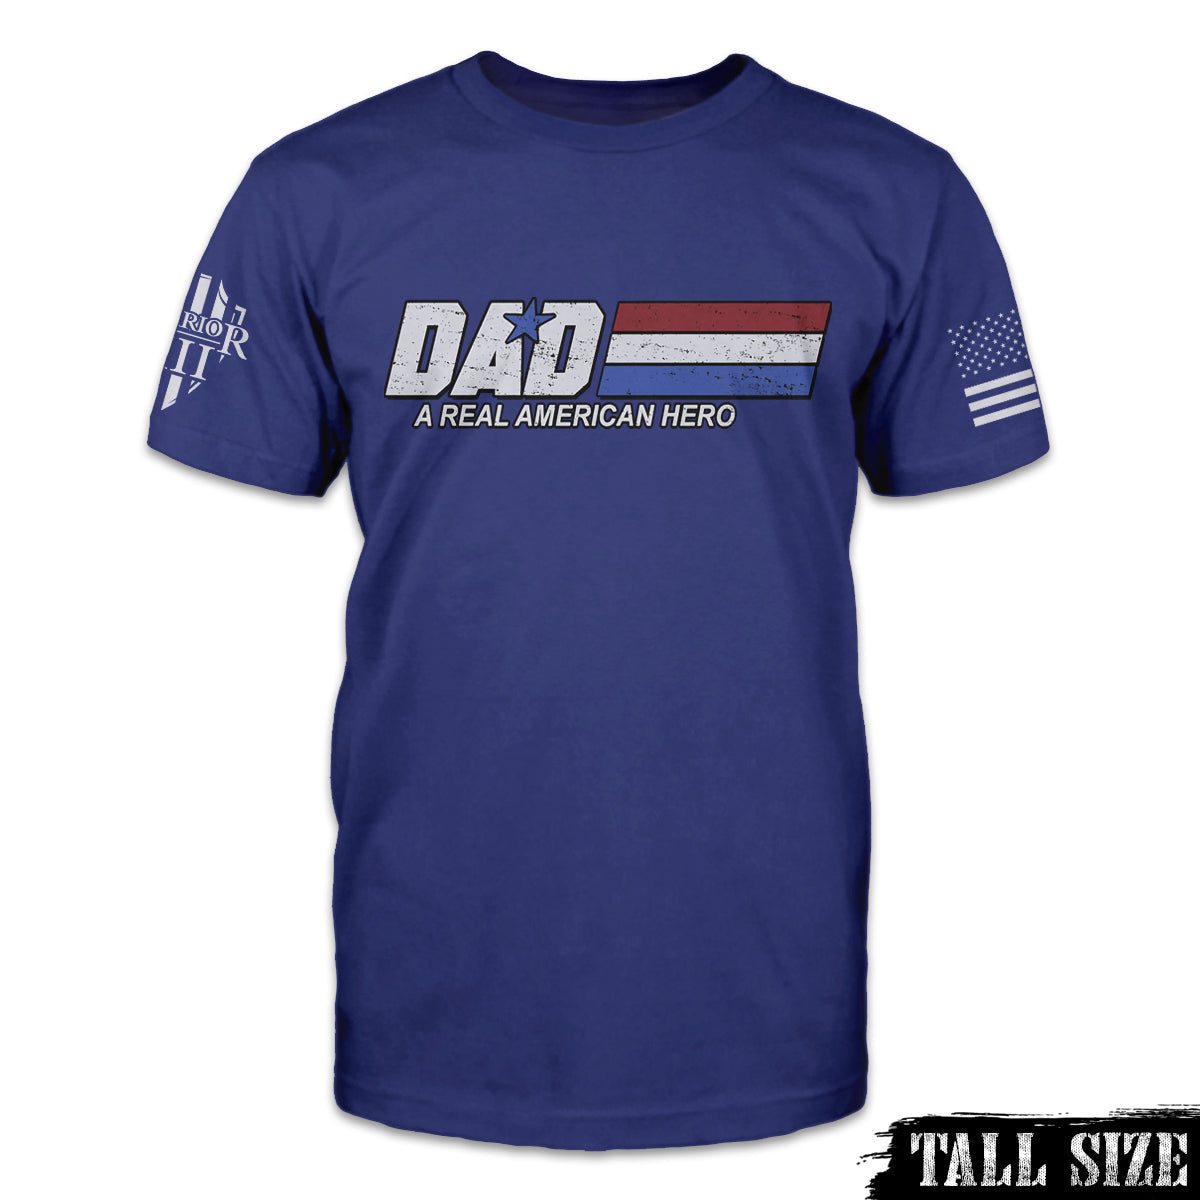 A blue tall size shirt with the words "Dad - A Real American Hero" printed on the front.